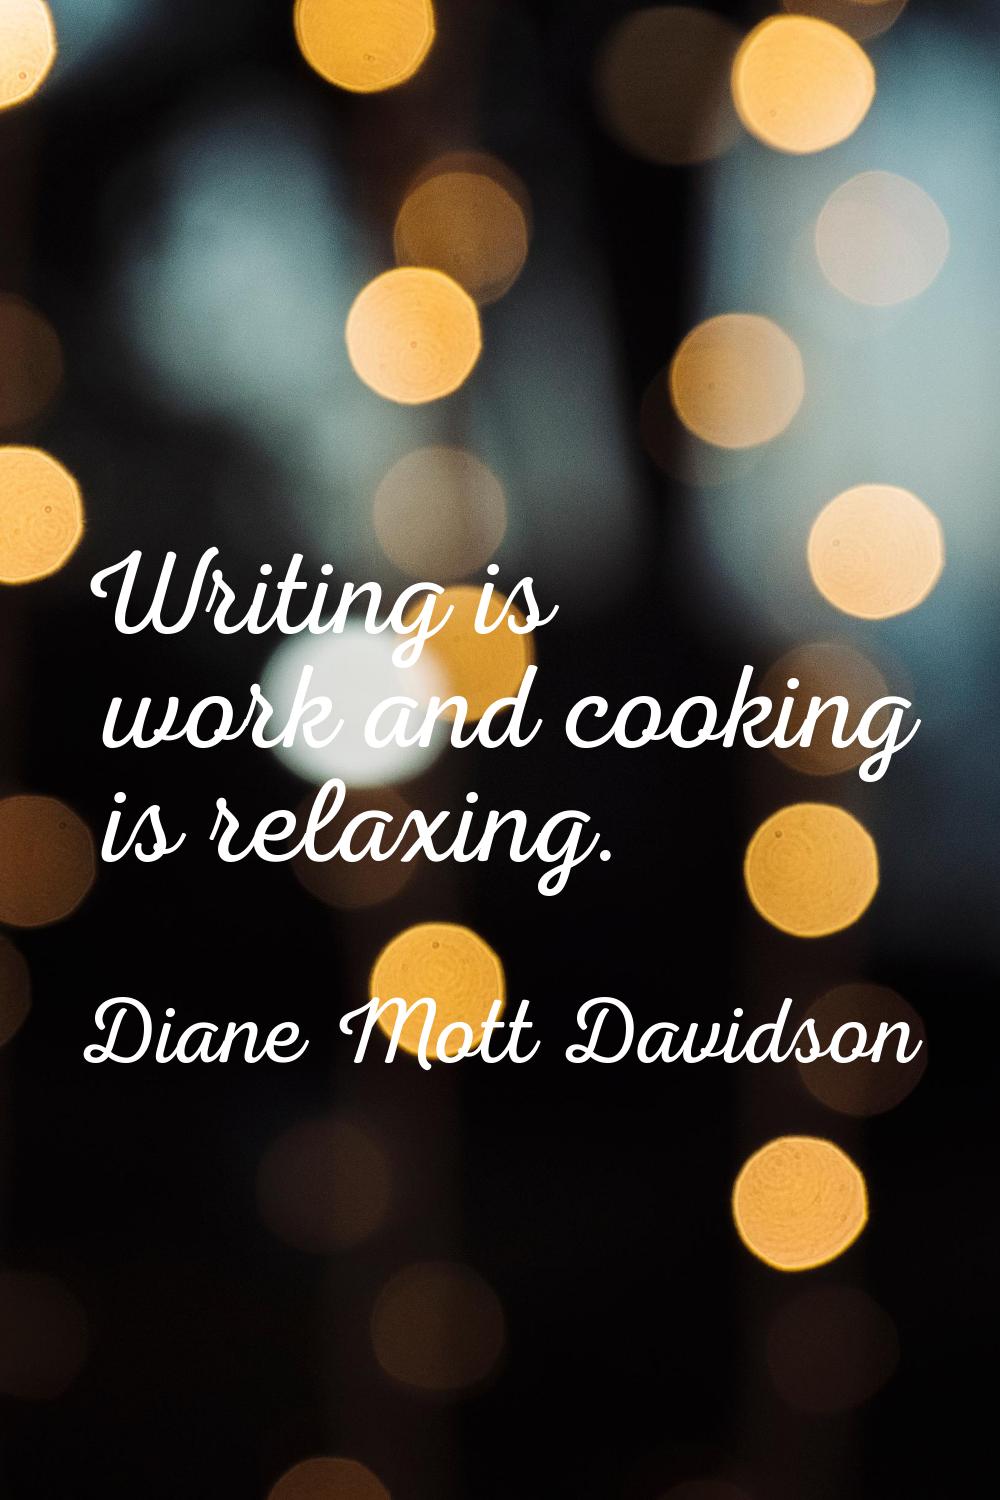 Writing is work and cooking is relaxing.